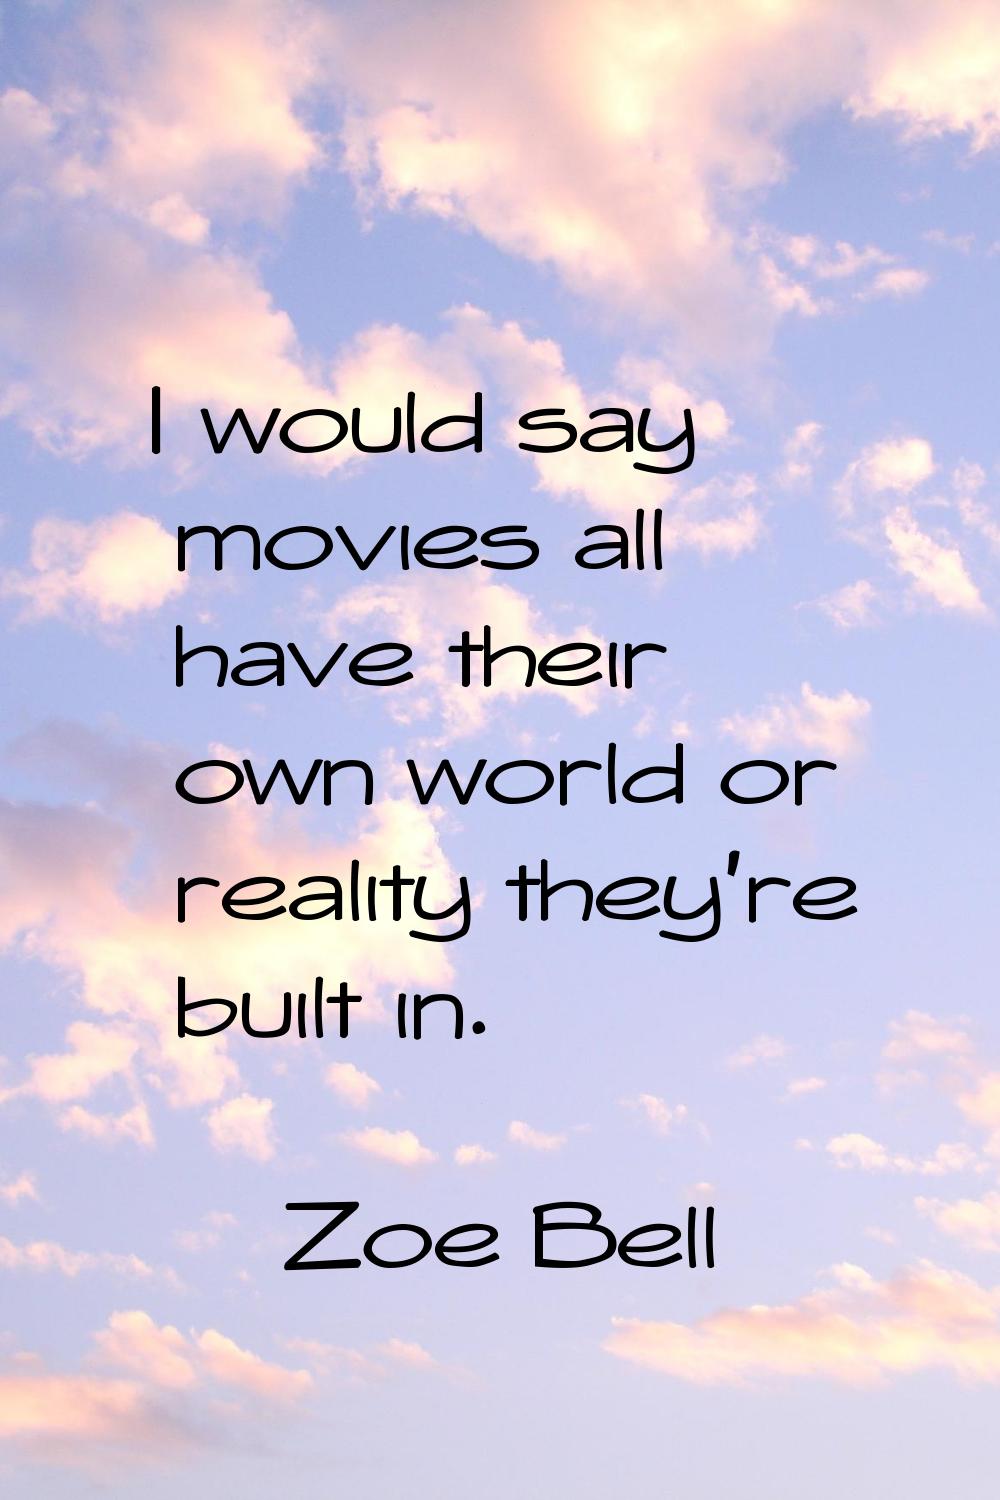 I would say movies all have their own world or reality they're built in.